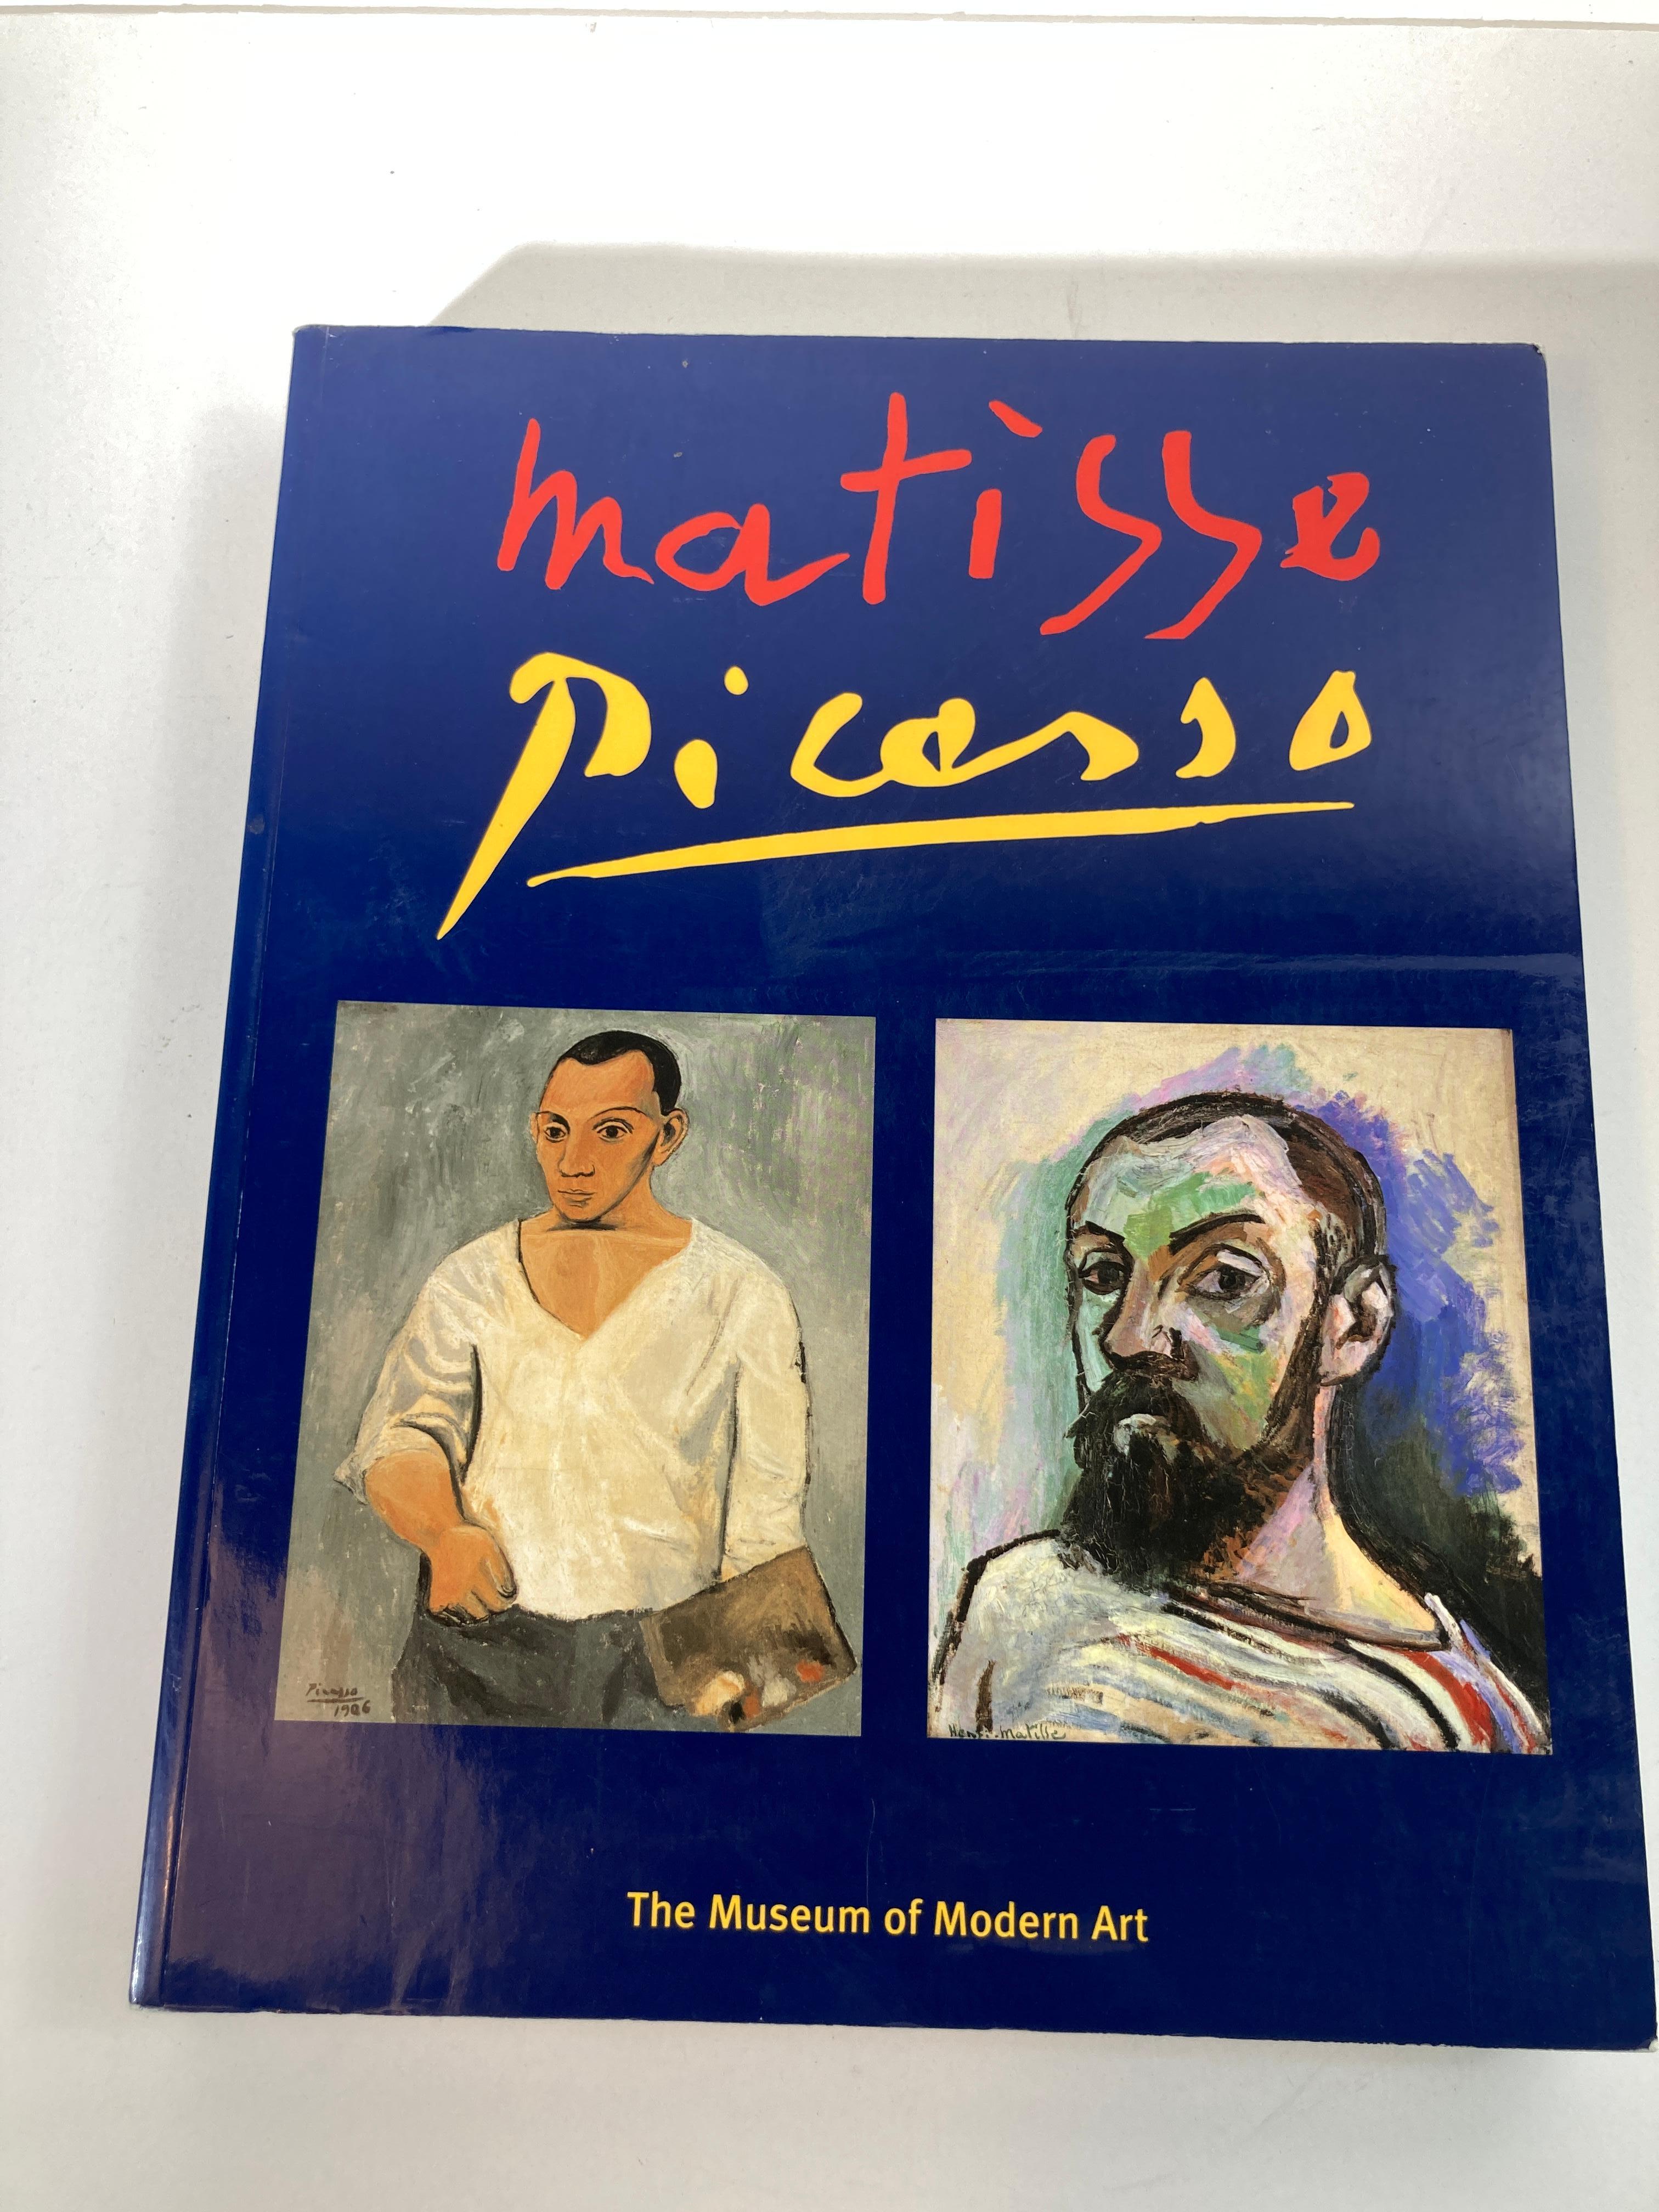 Henri Matisse & Pablo Picasso
MATISSE PICASSO
New York: The Museum of Modern Art, New York, 2002. First Edition; First 
By Anne Baldassari & Elizabeth Cowling & John Golding & Isabelle Monod-Fontaine & John Elderfield; 
This book was published